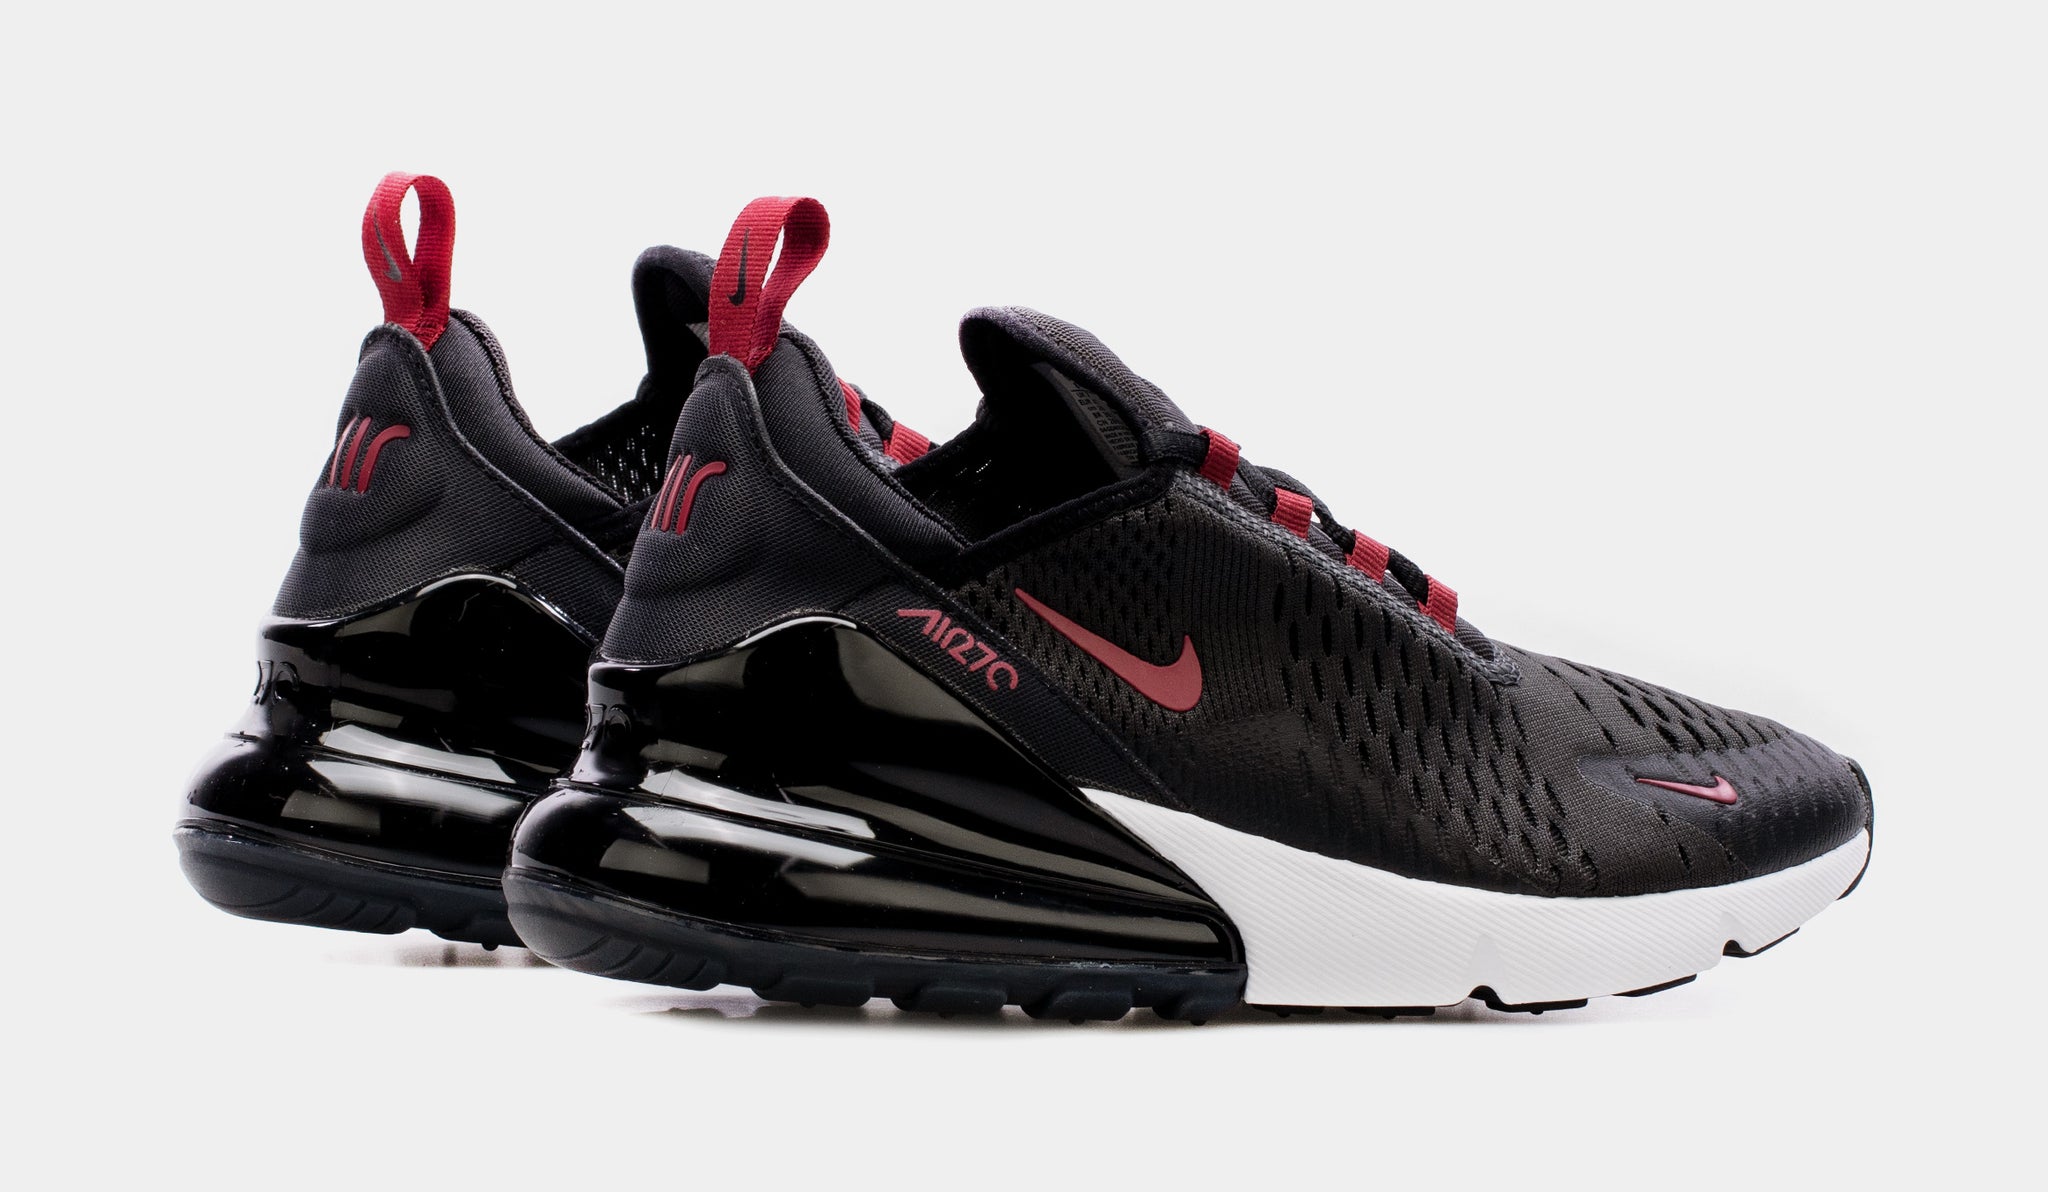 Air Max 270 Mens Running Shoes (Black/Red)